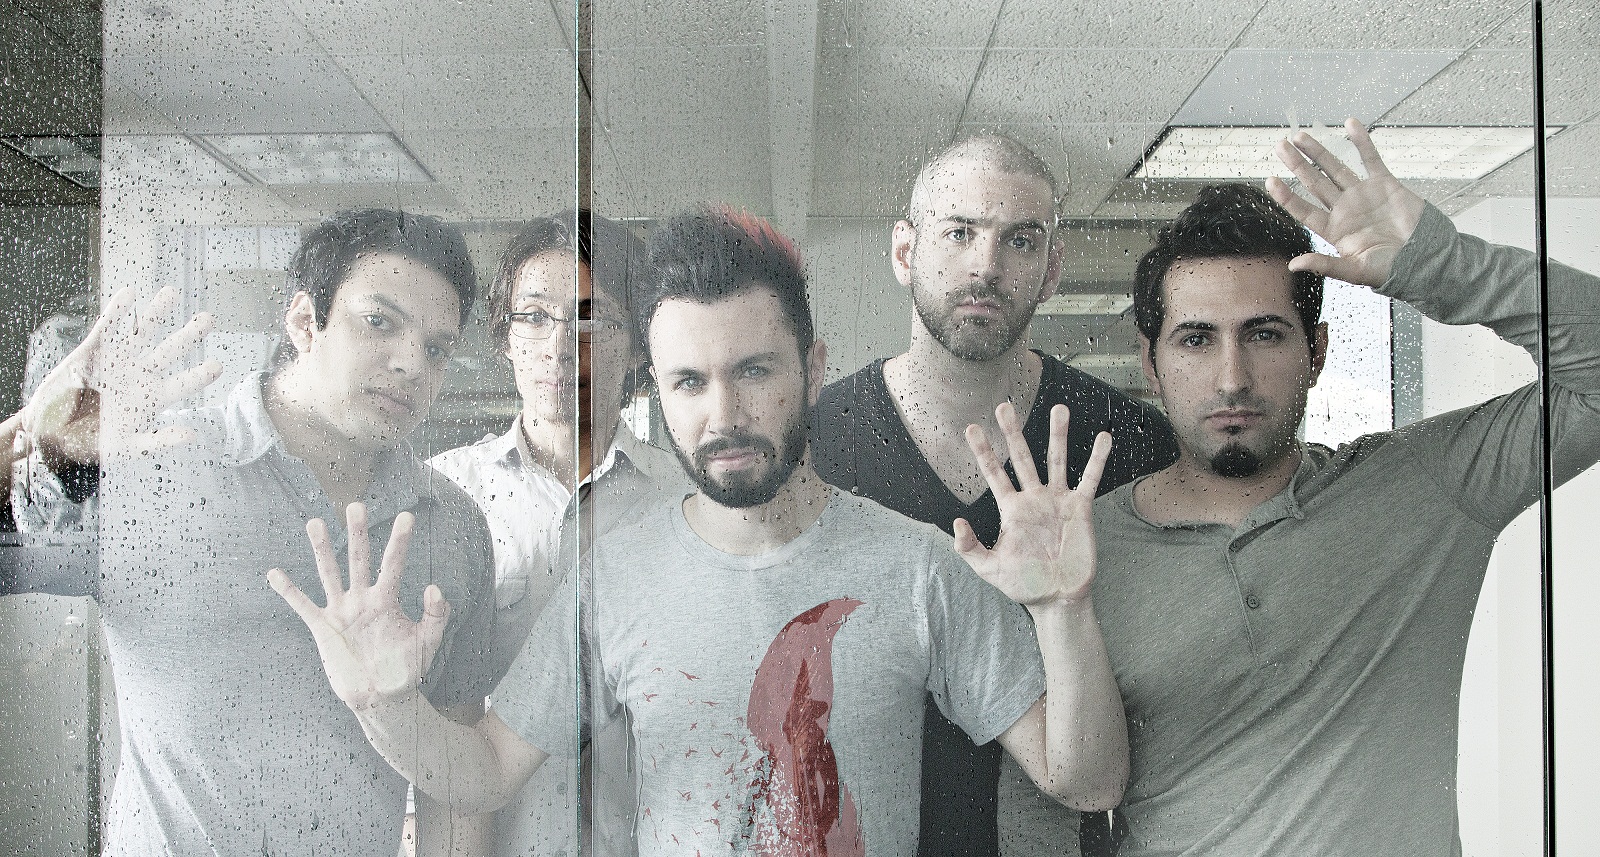 Periphery announce new album and track listing